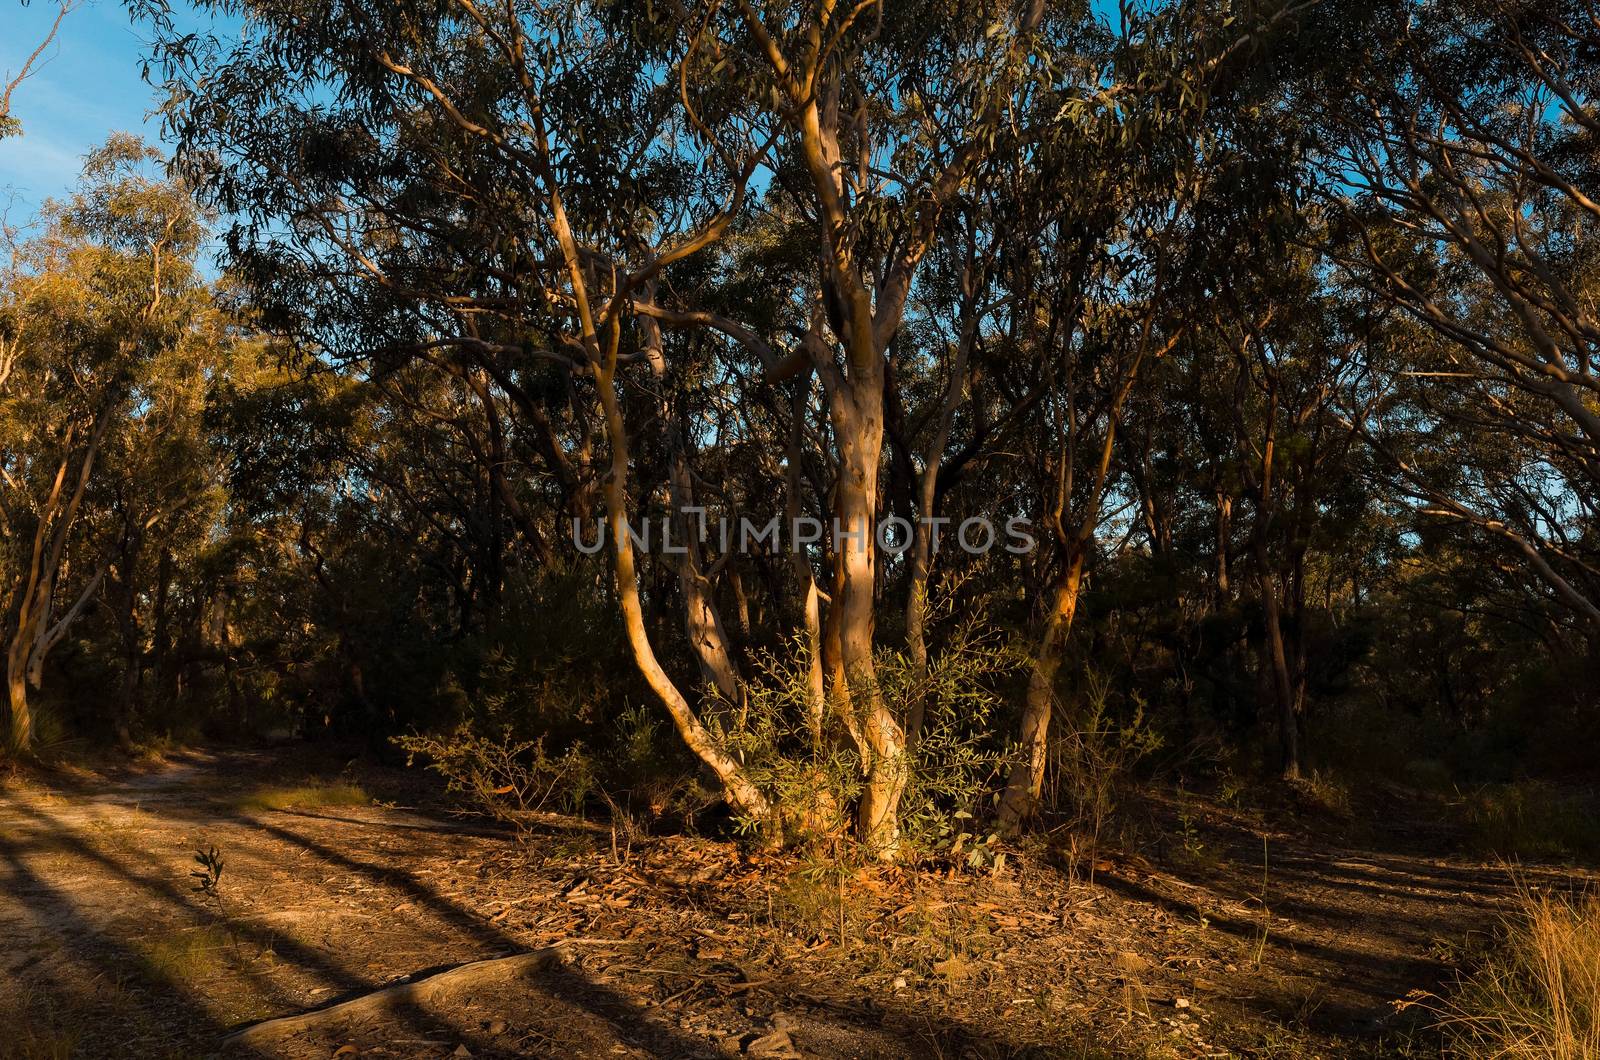 Photograph of diverging paths in the Australian bush.